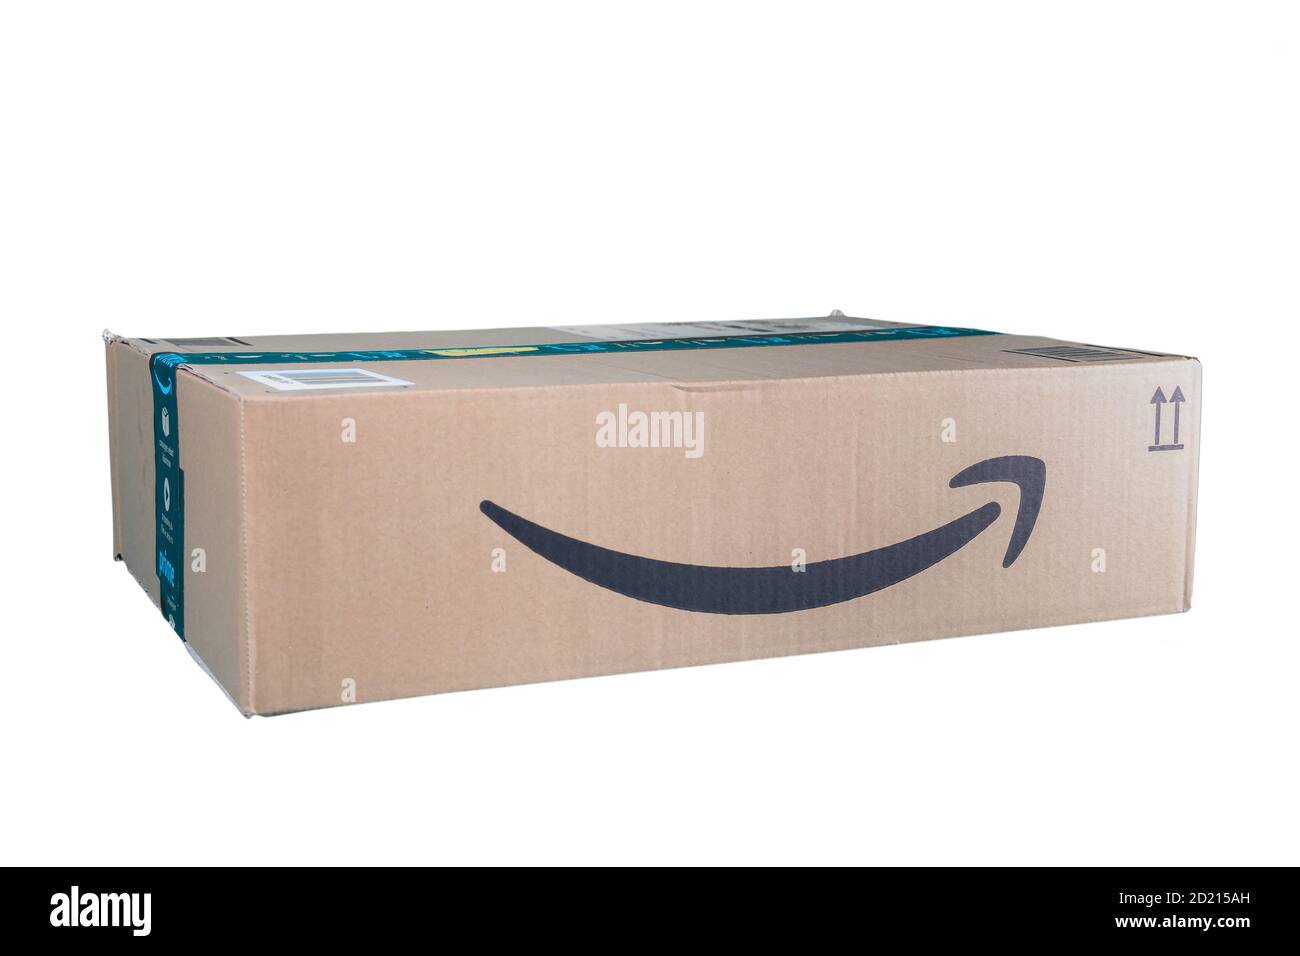 Huelva, Spain - October 5, 2020: Amazon Prime parcel over white background. Prime is a service offered by online retailer Amazon for faster delivery o Stock Photo